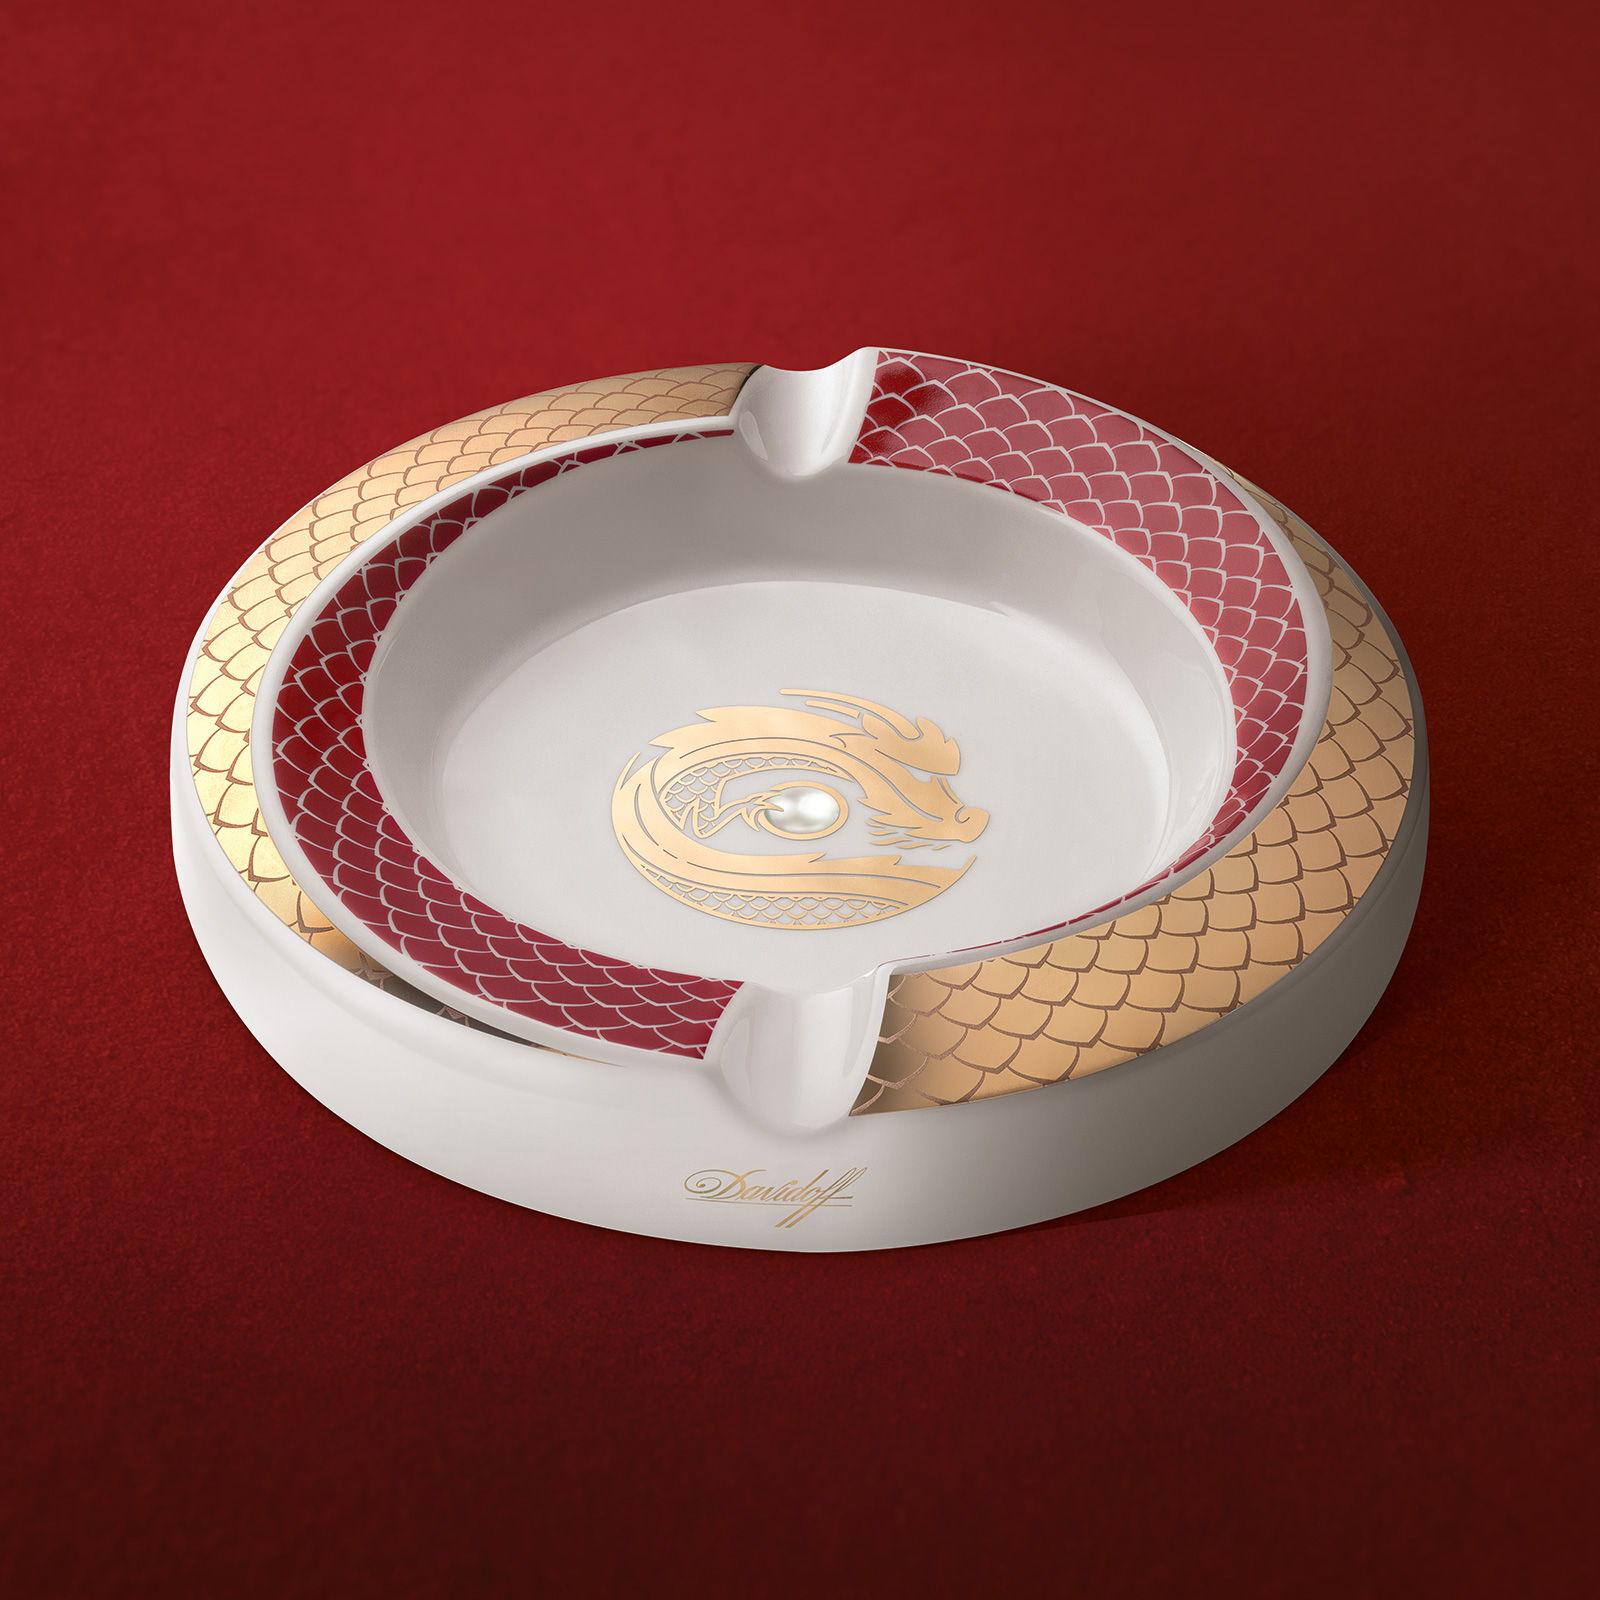 The round Davidoff Year of the Dragon porcelain ashtray shown from above.